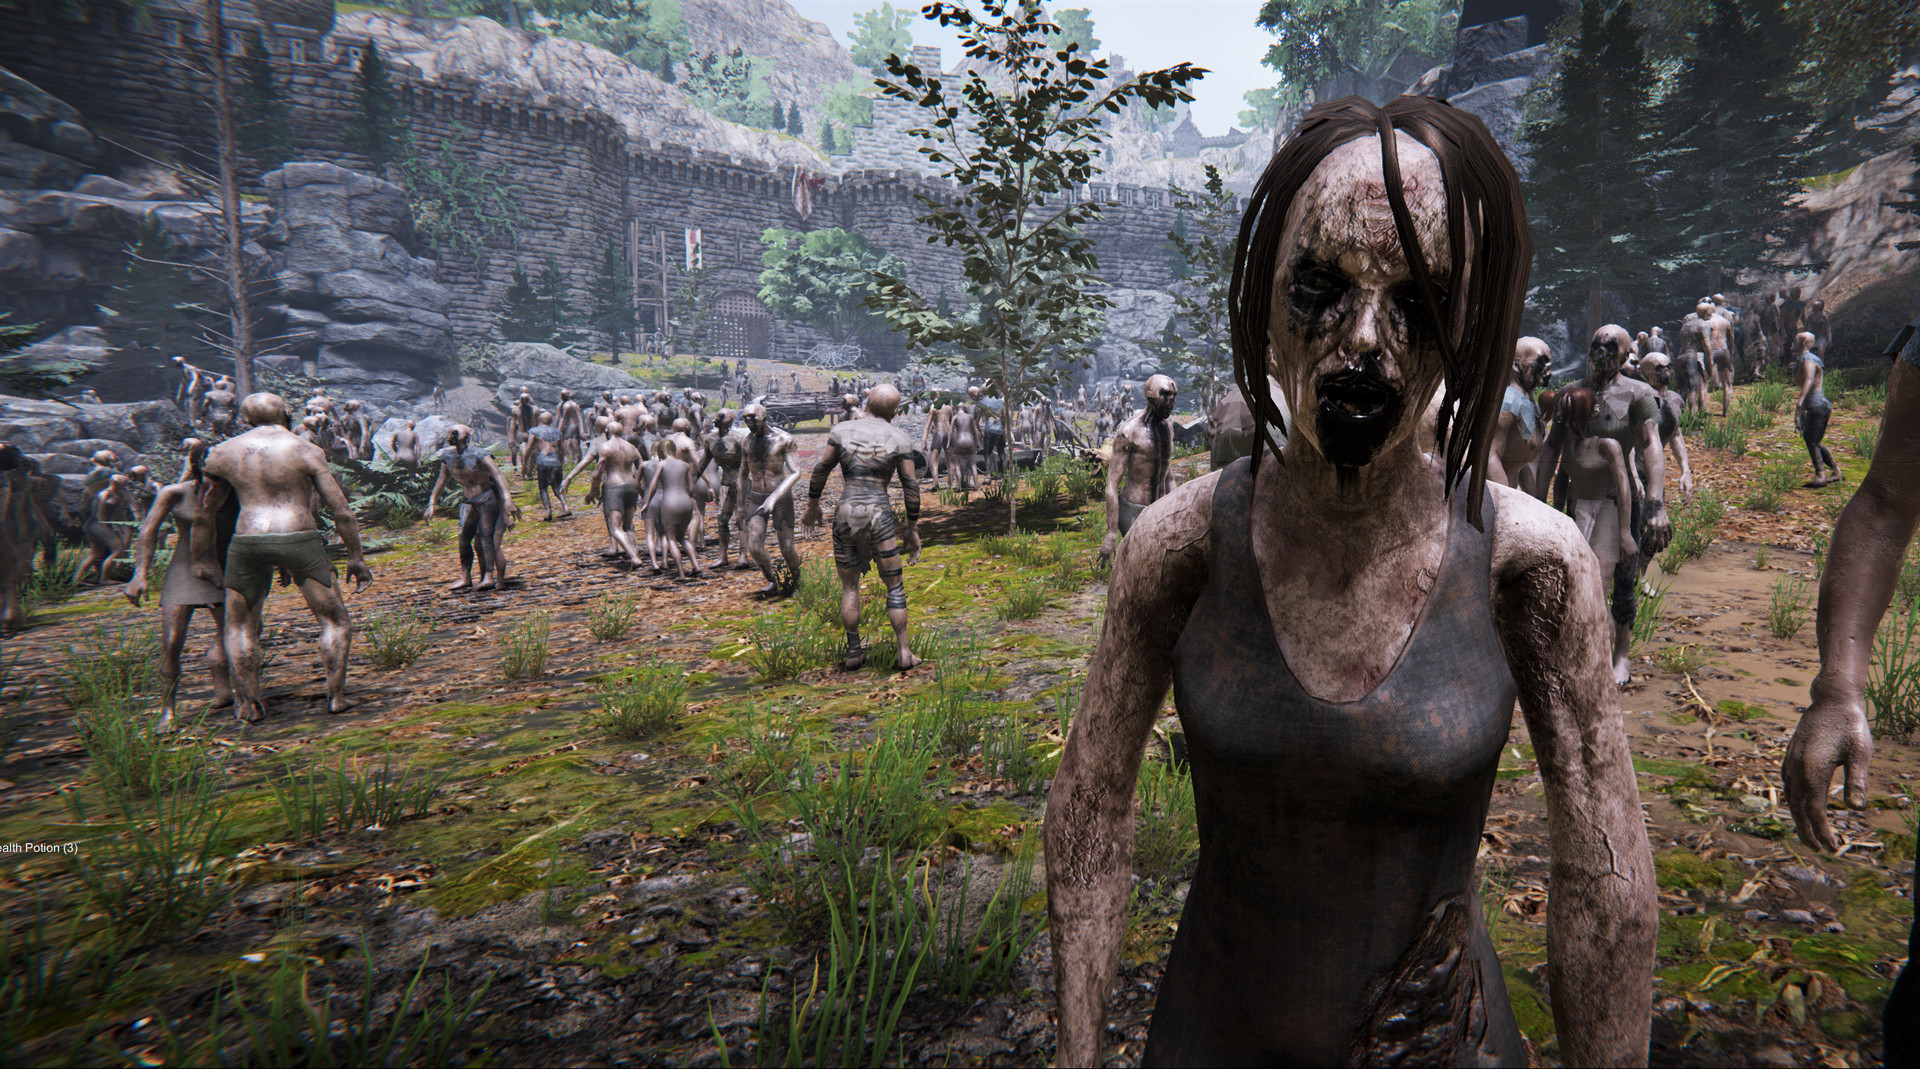 The Black Masses Download - Download The Black Masses Latest Version Free Torrent On Pc Lastgamespc Com - The black masses game free download torrent.